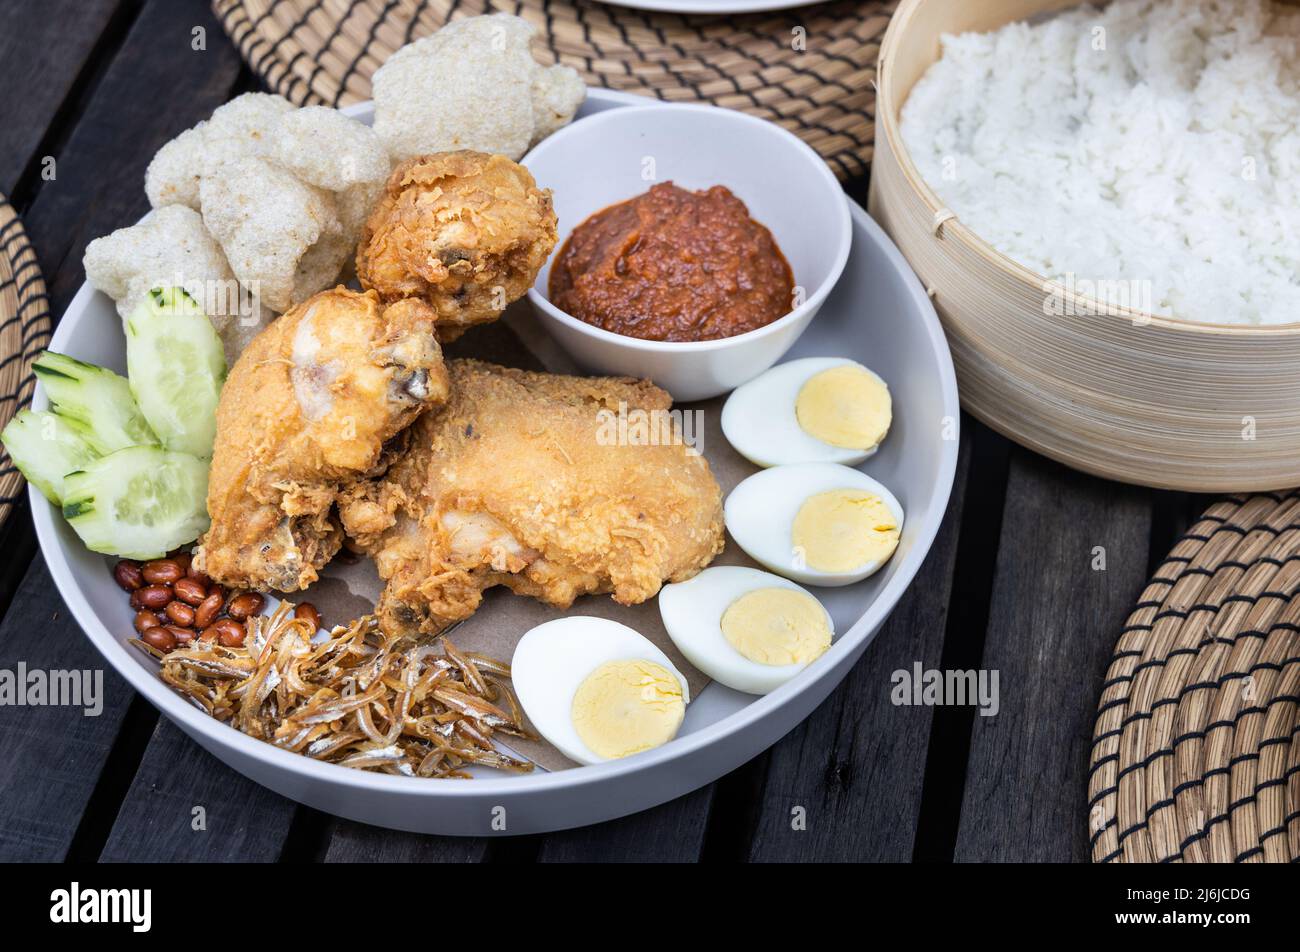 Nasi lemak with fried chicken, anchovis, eggs, groundnuts and sambal is popular Malaysia delicacy, served with rice cooked in coconut milk Stock Photo